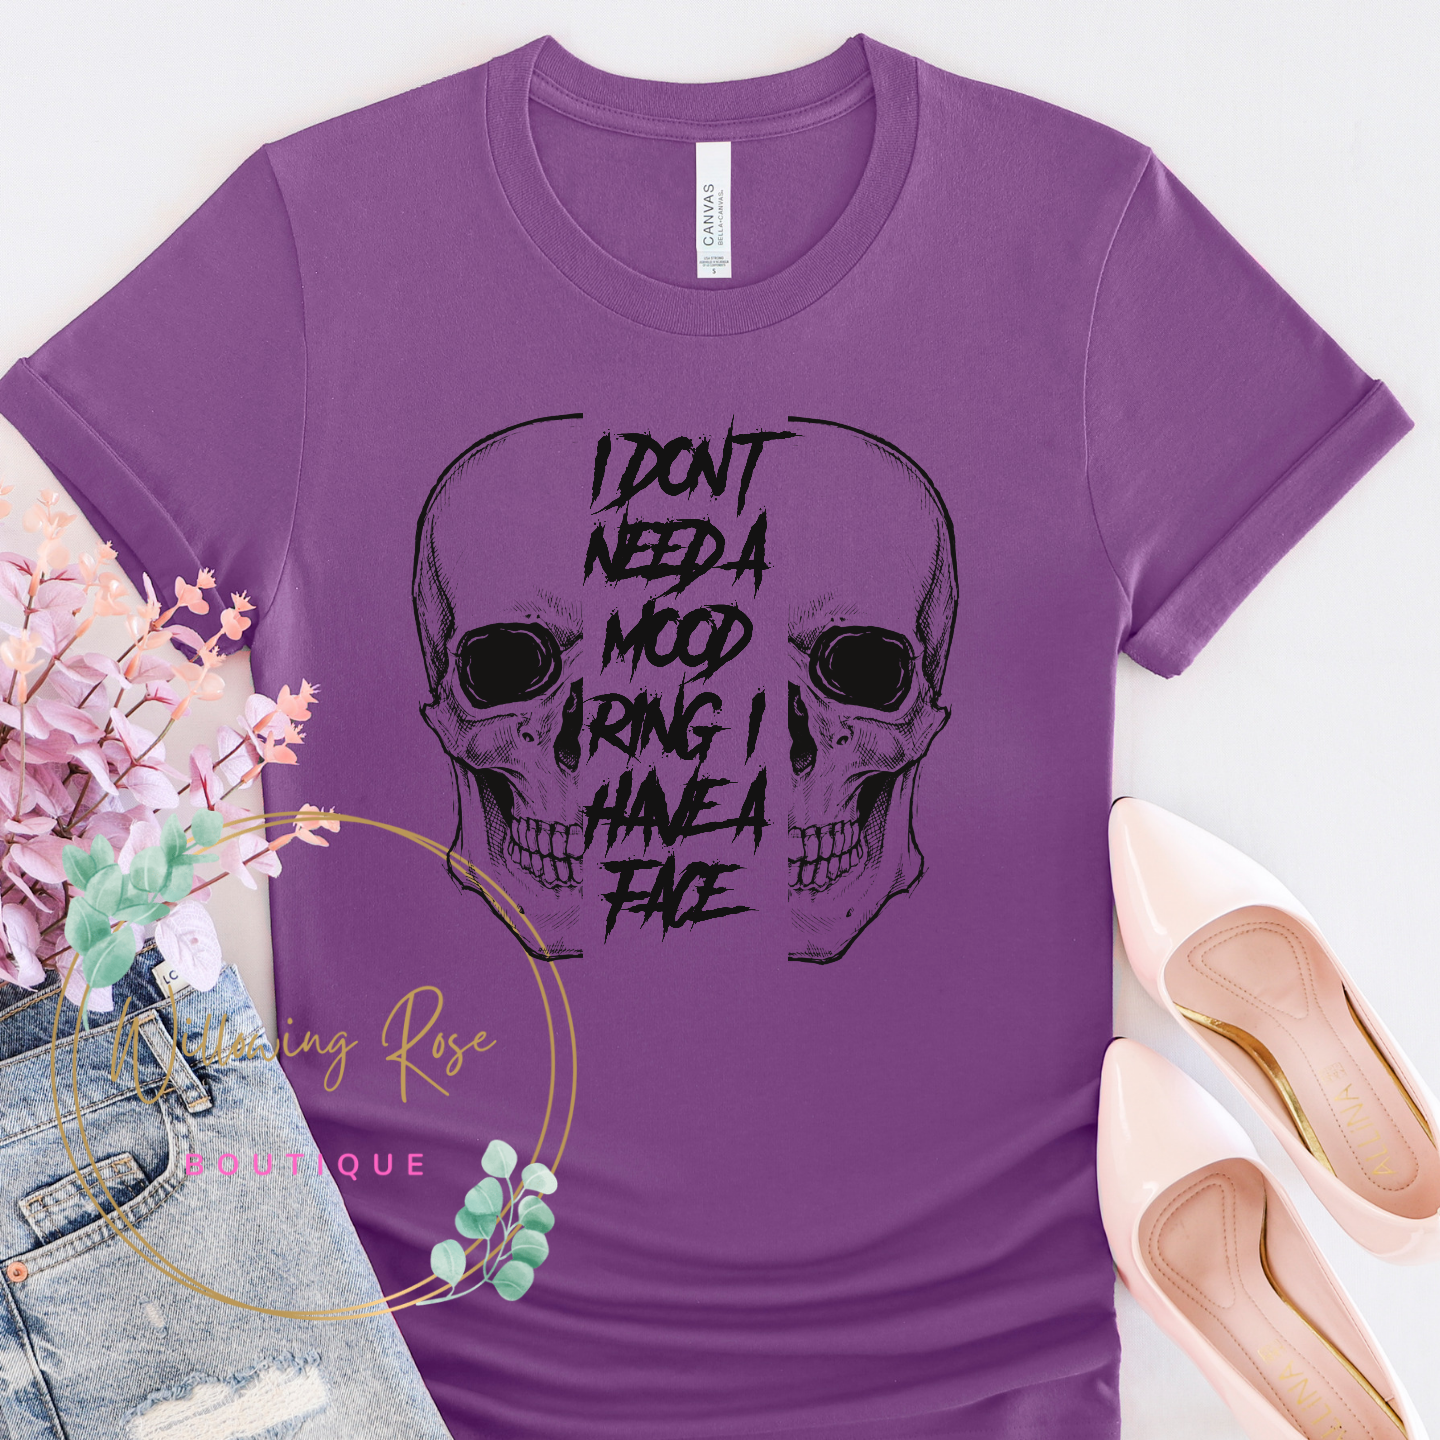 I don't need a mood ring ADULT TEES